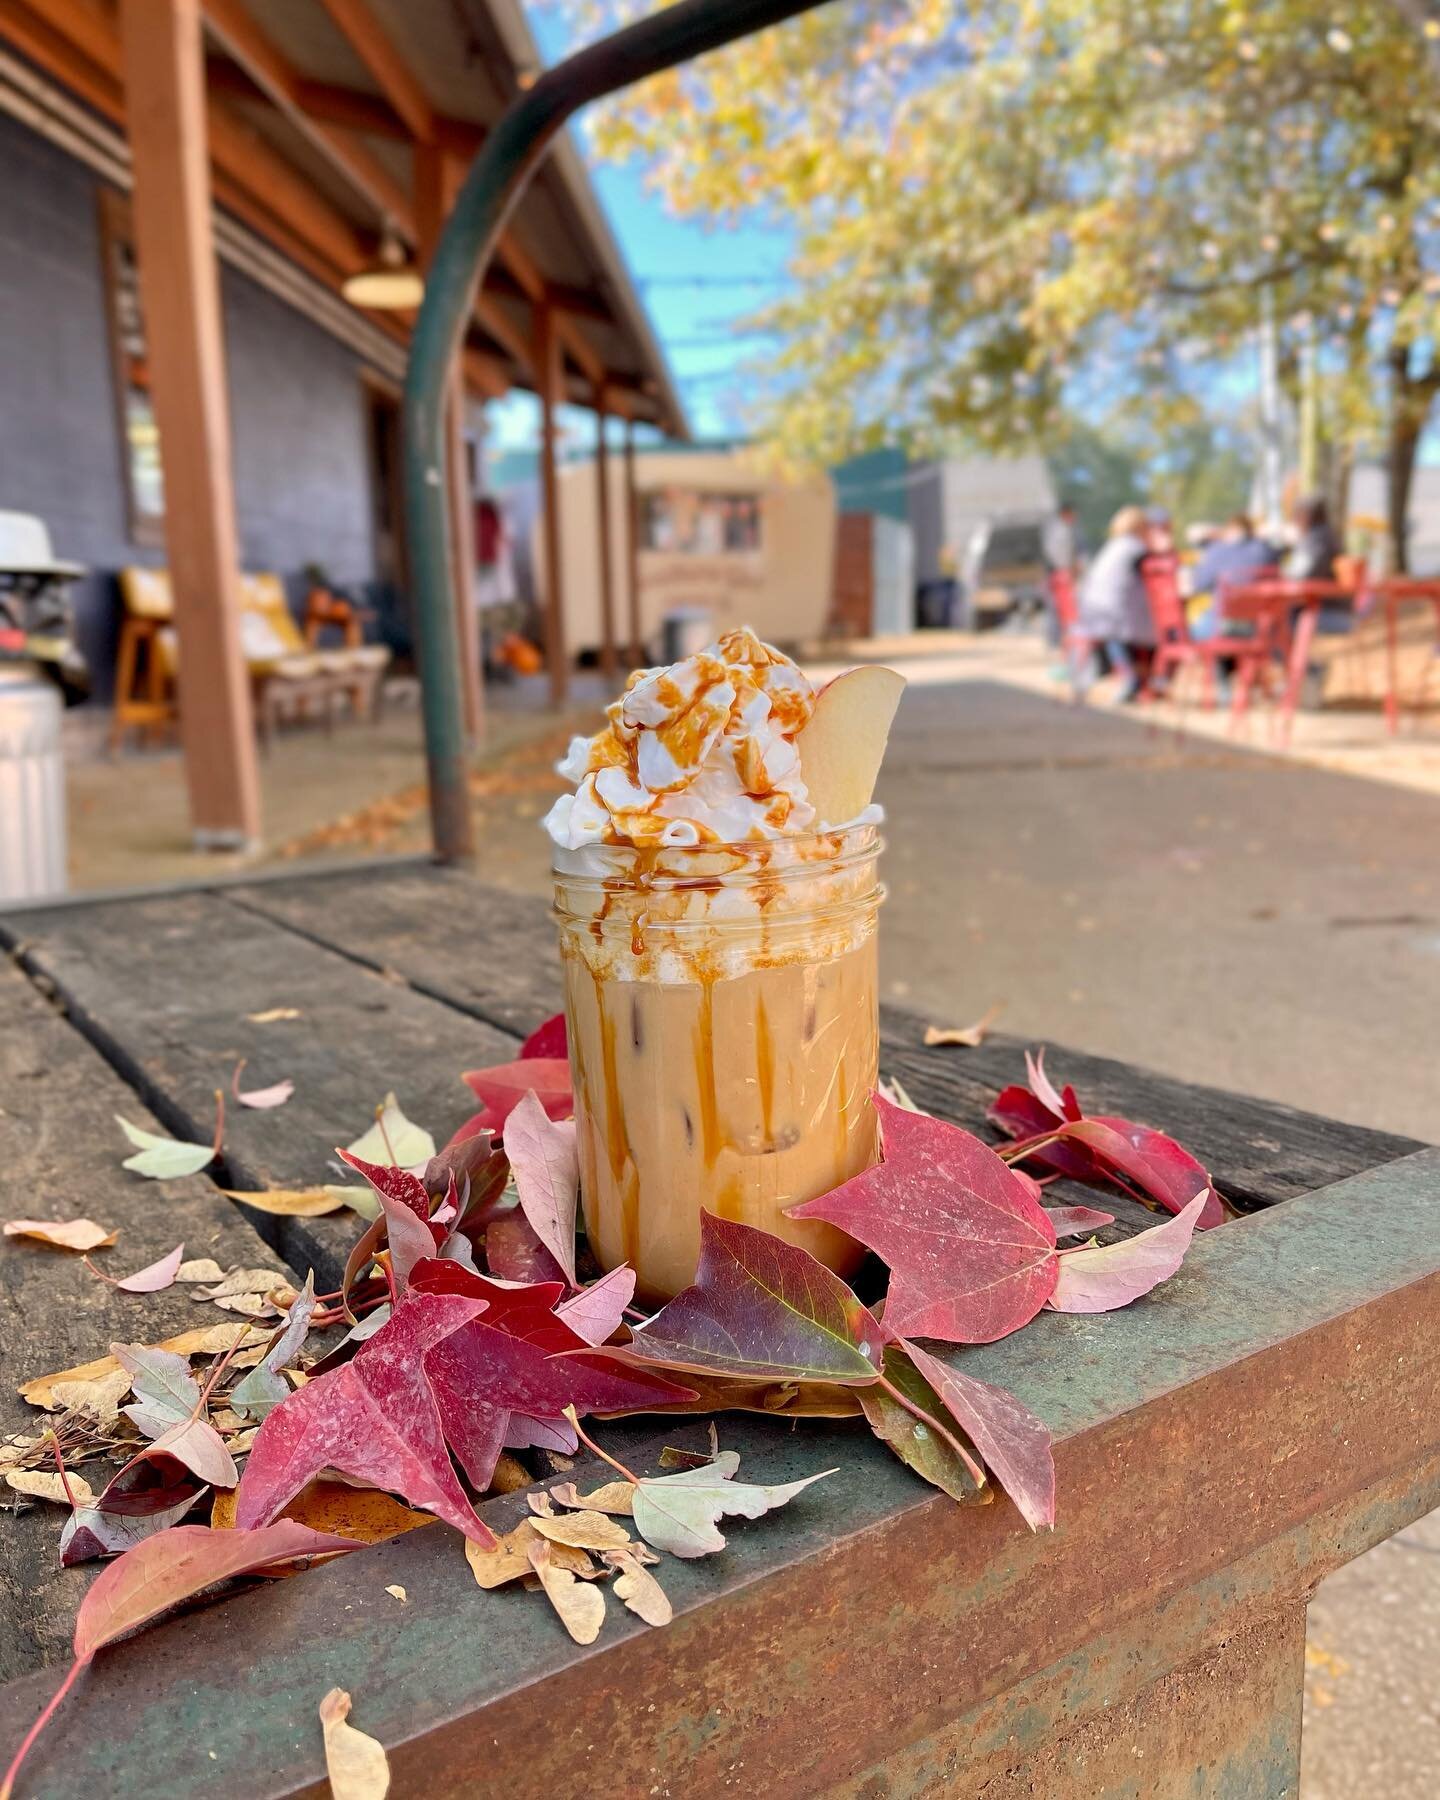 Our Caramel Apple Butter Latte has all the fall feels. Made with brown sugar, Fuji apple, and just the right amount of spice, it really is autumn in a cup. Iced or hot, there is no bad way to enjoy this latte. Stop by and enjoy one on this beautiful 